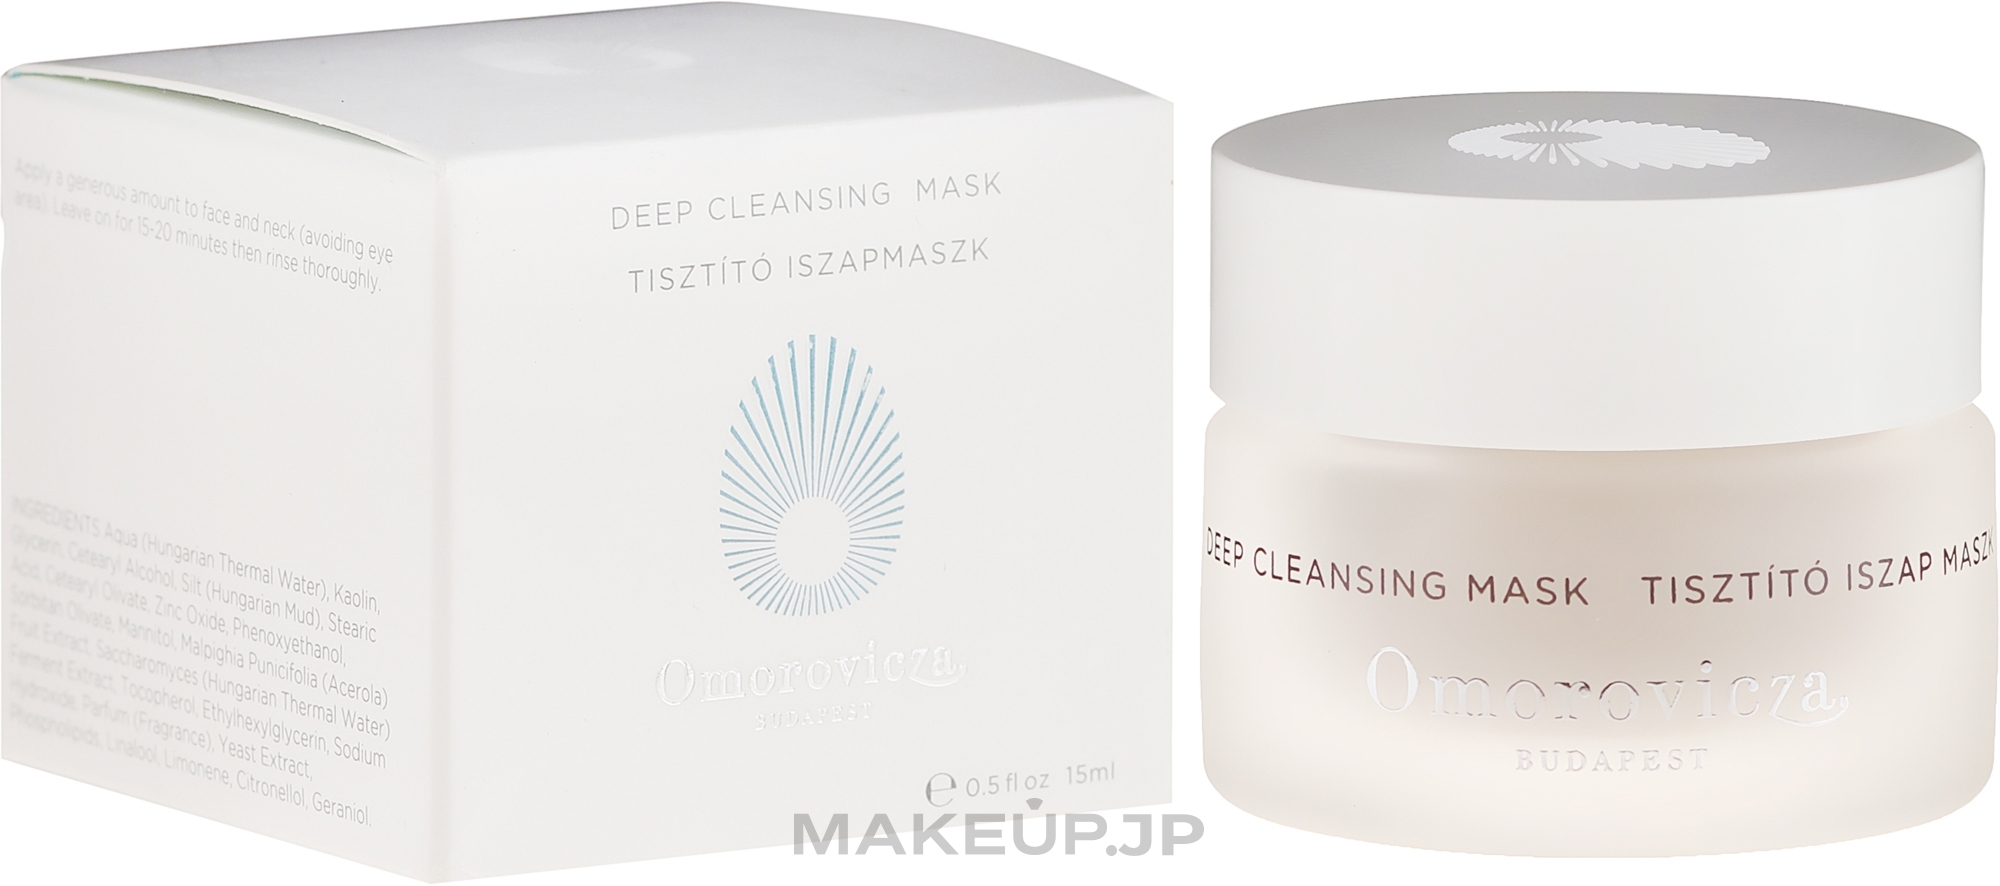 Cleansing Face Mask - Omorovicza Deep Cleansing Mask (mini size) — photo 15 ml